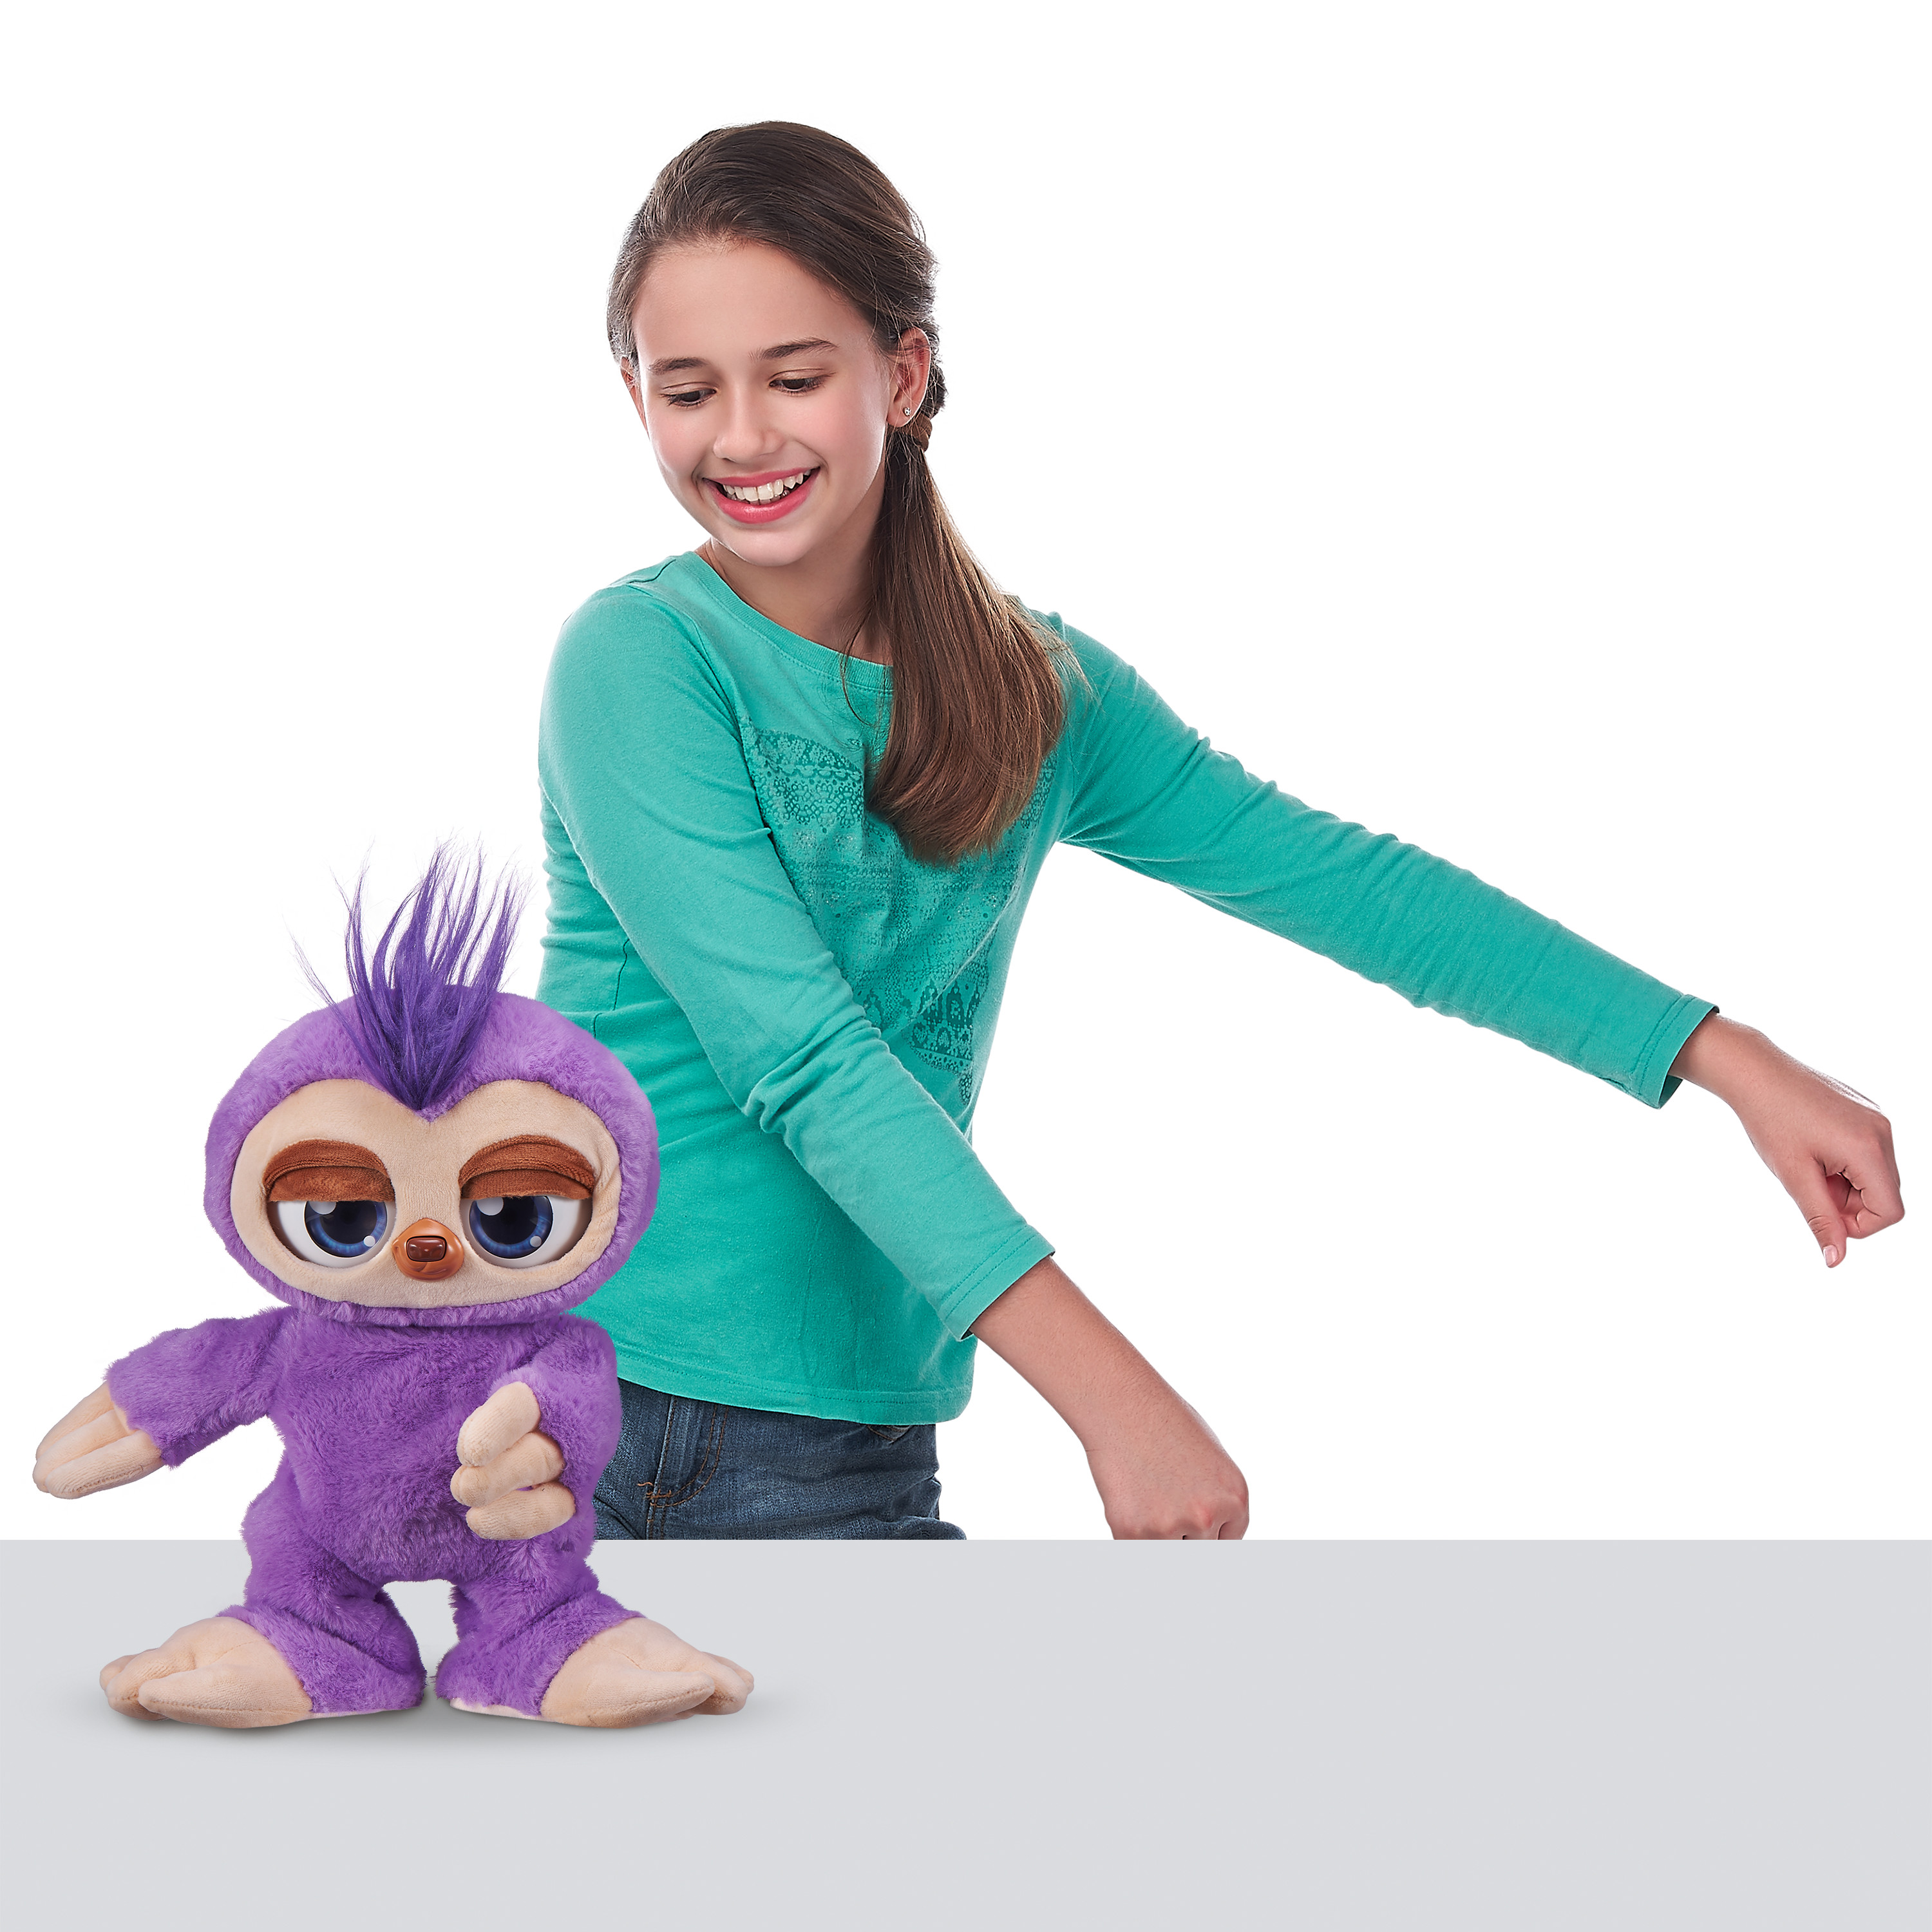 Pets Alive Fifi the Flossing Sloth Battery-Powered Robotic Toy by ZURU - image 10 of 13